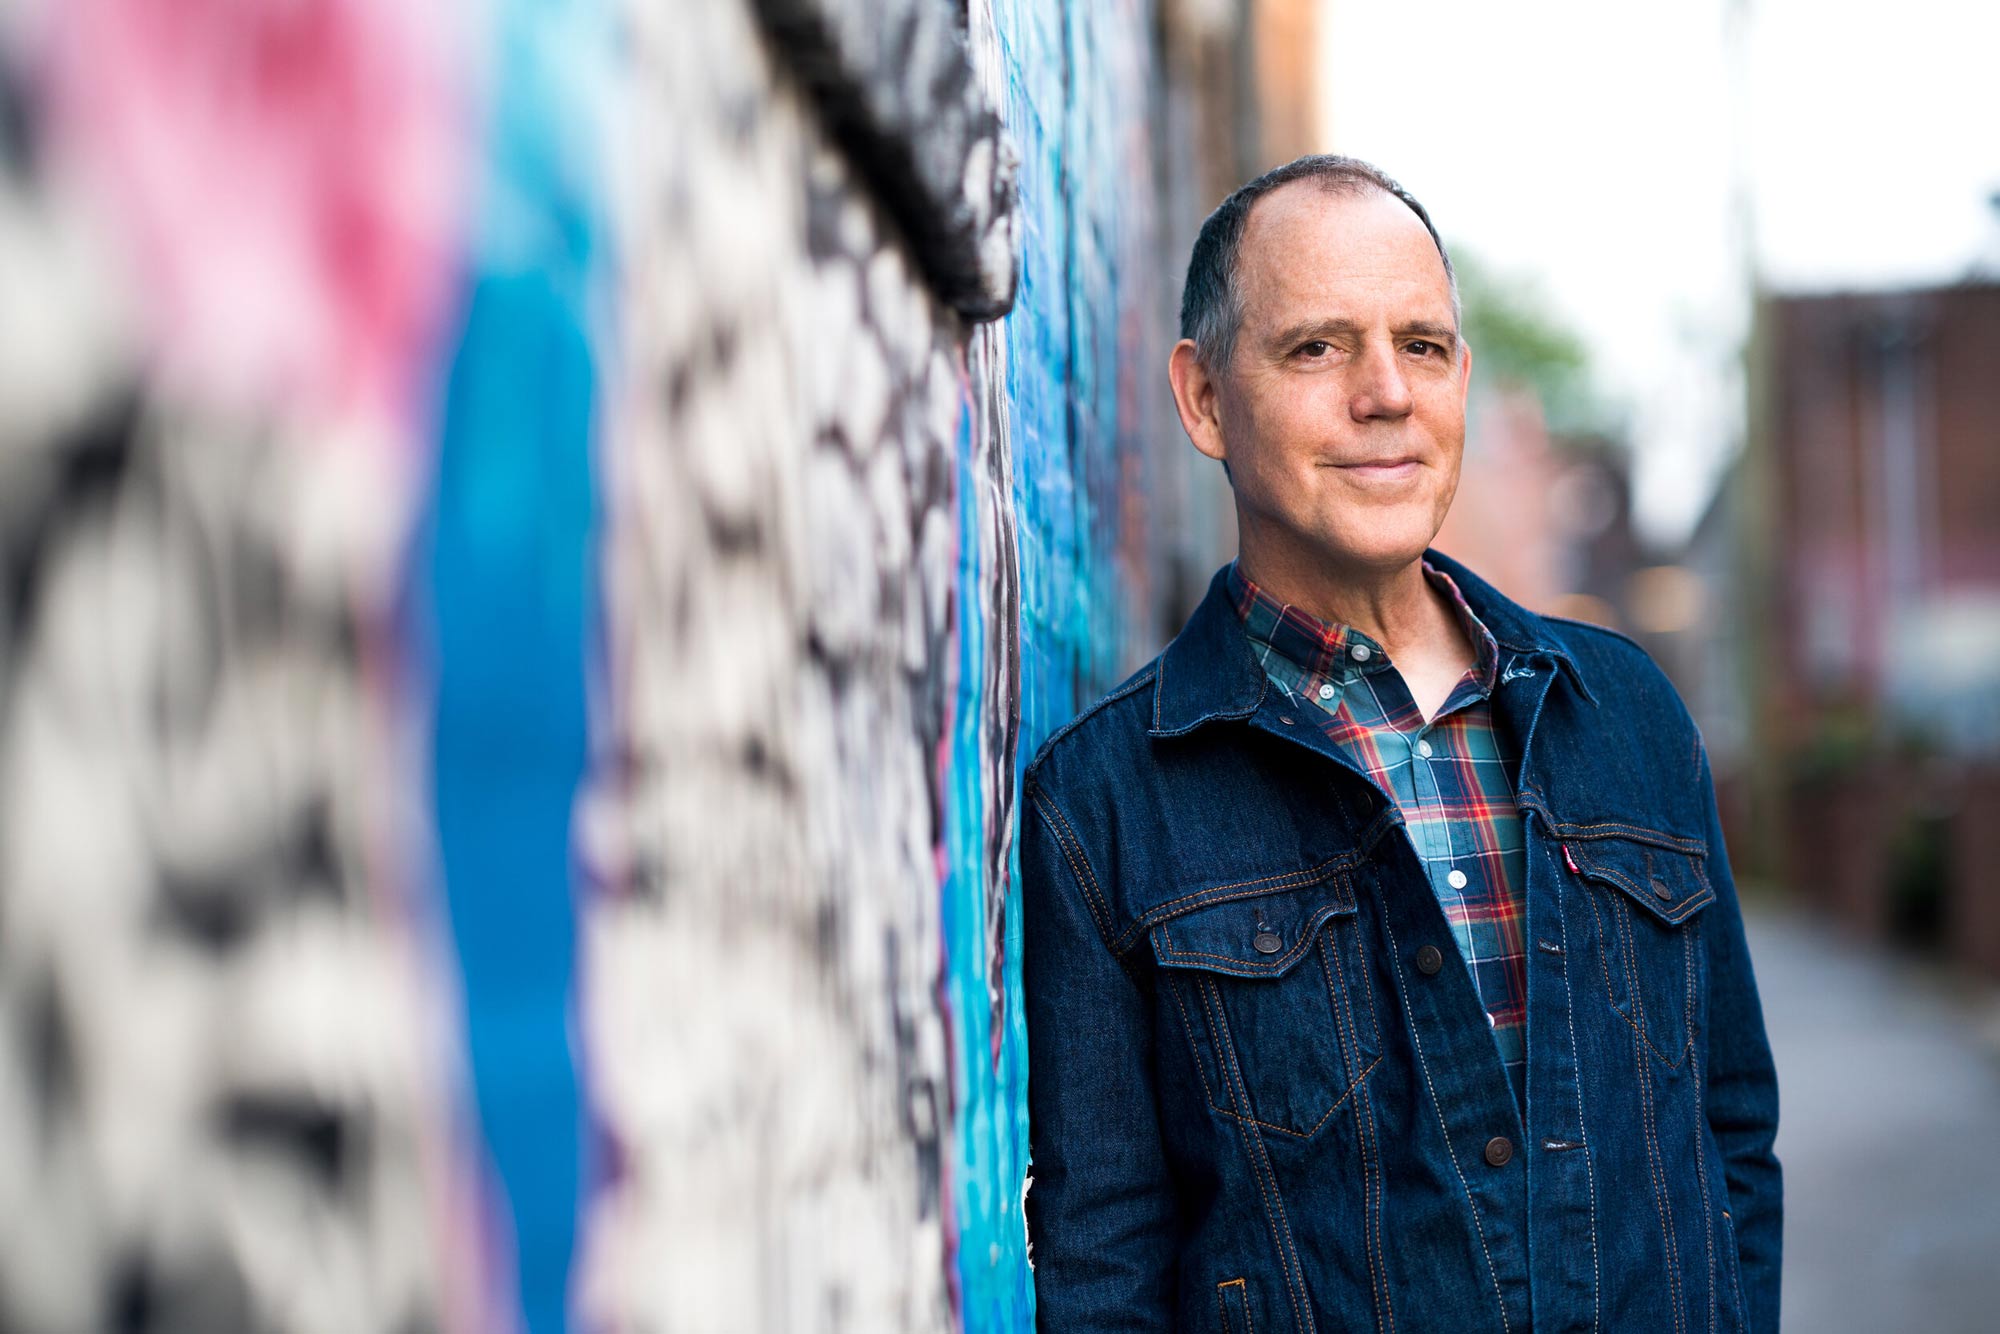 Folk singer-songwriter David Wilcox tells stories full of heart, humor, and hope, substance, searching, and style, over a touring career spanning three decades.